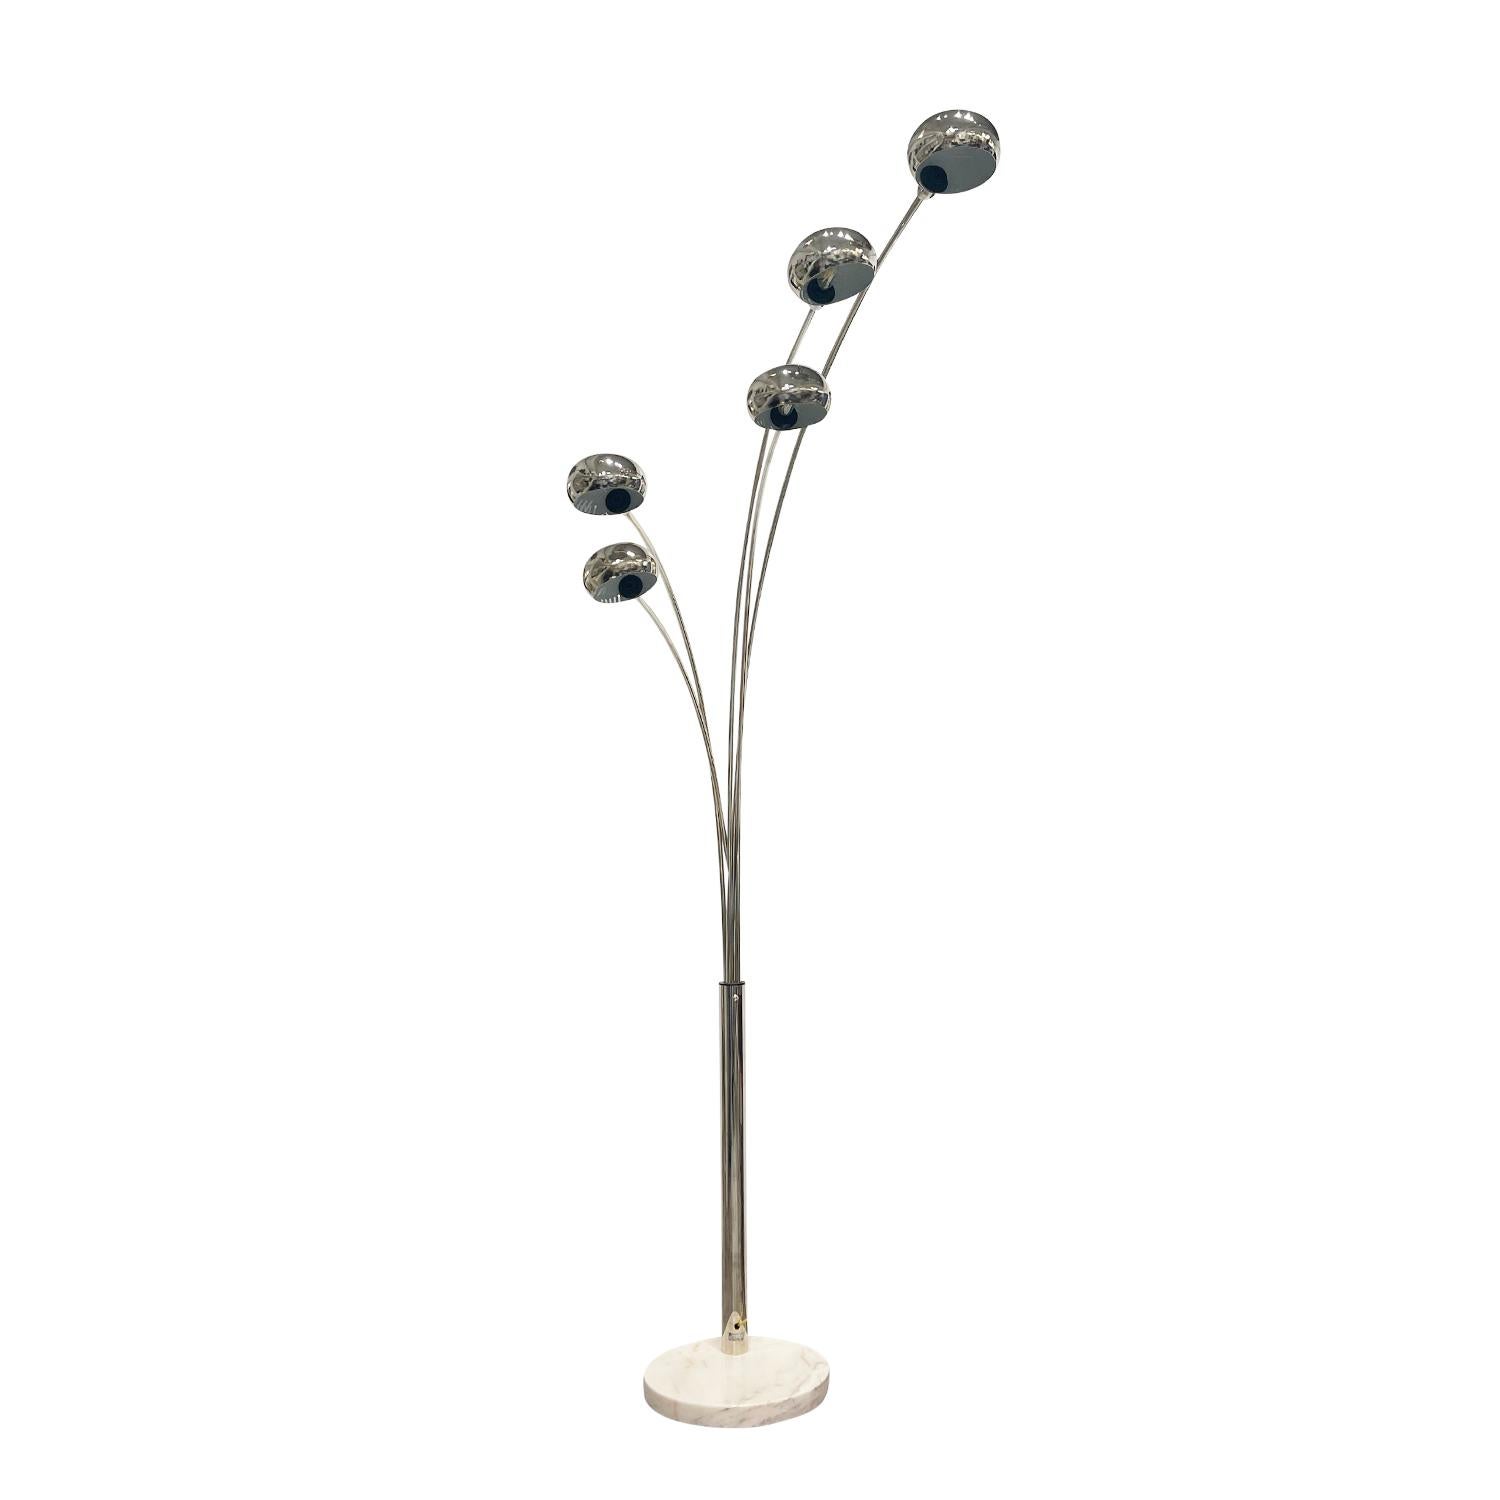 A silver-gold, vintage Mid-Century modern Swedish reading floor lamp made of hand crafted polished chrome, designed by Hans Bergström and produced by Ateljé Lyktan, in good condition. Each of the five round, slightly open adjustable chromed metal